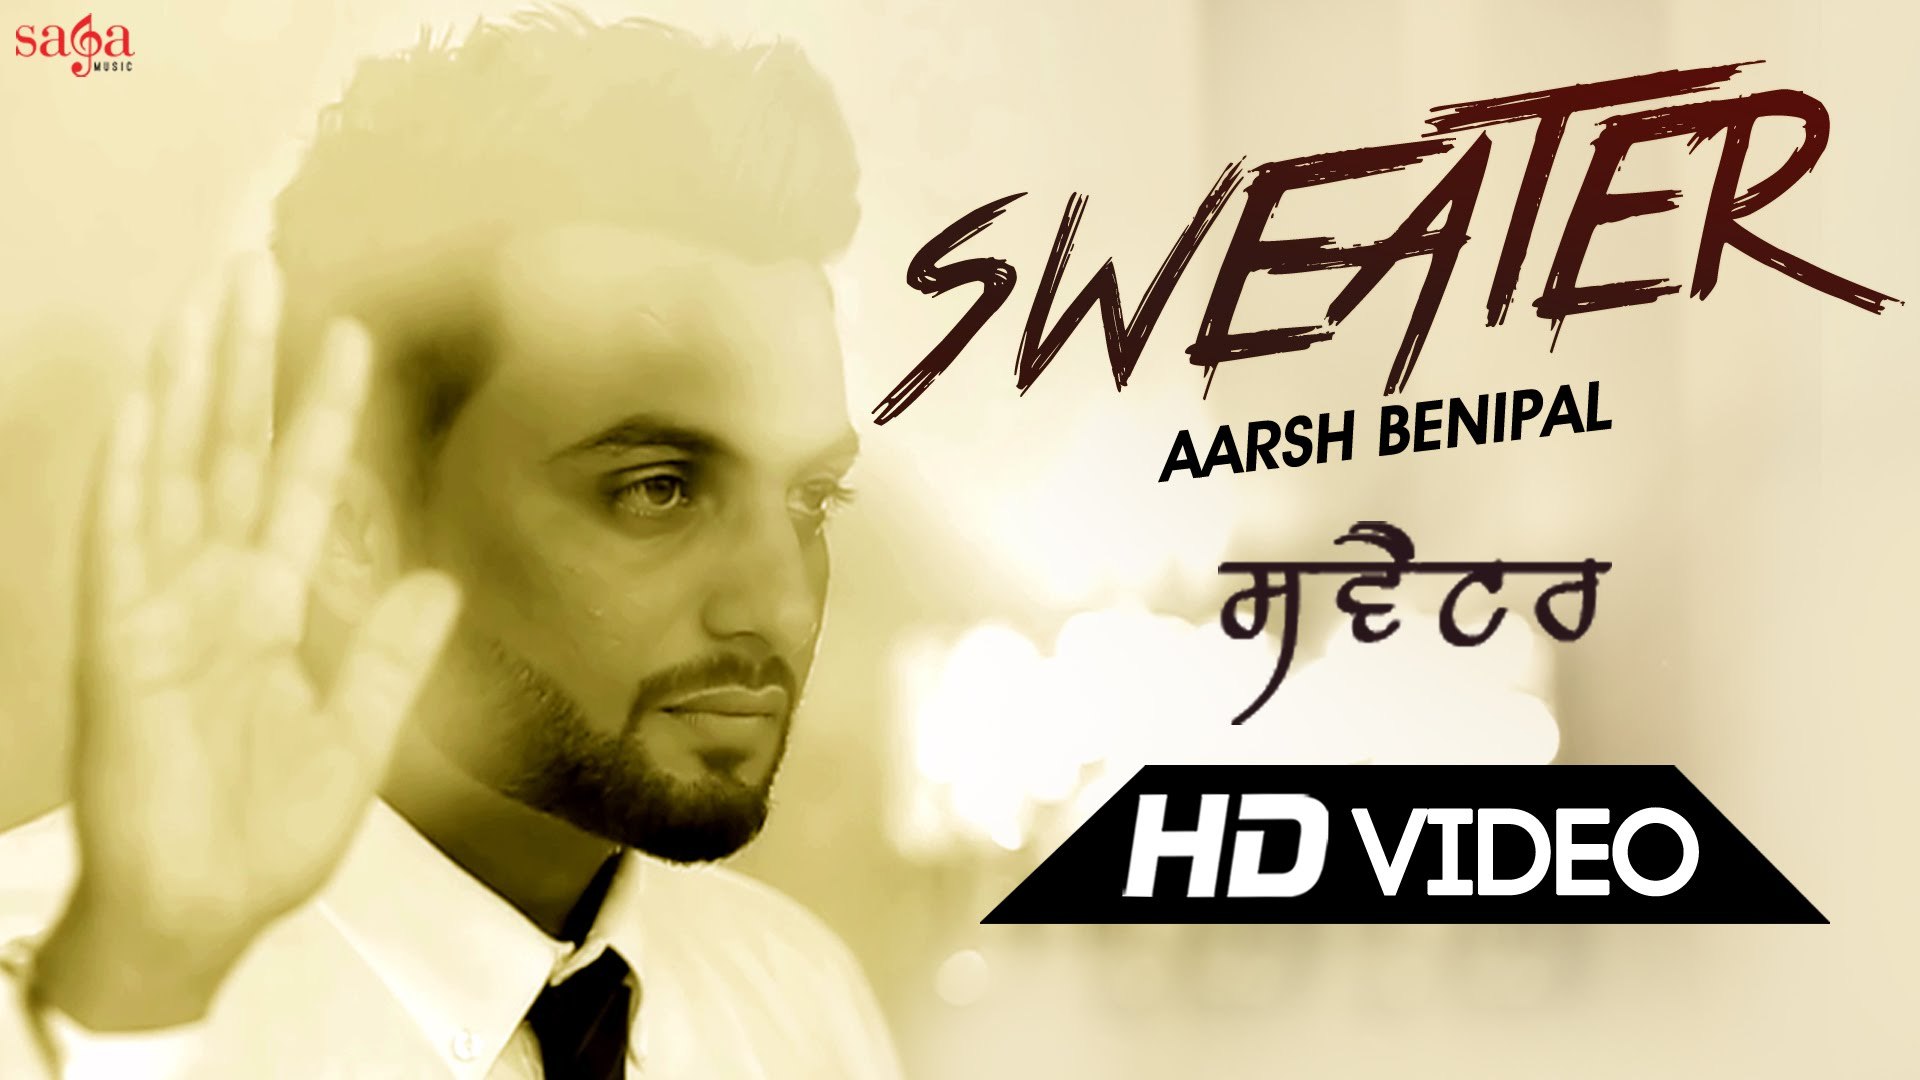 aarsh benipal song sweater mp3